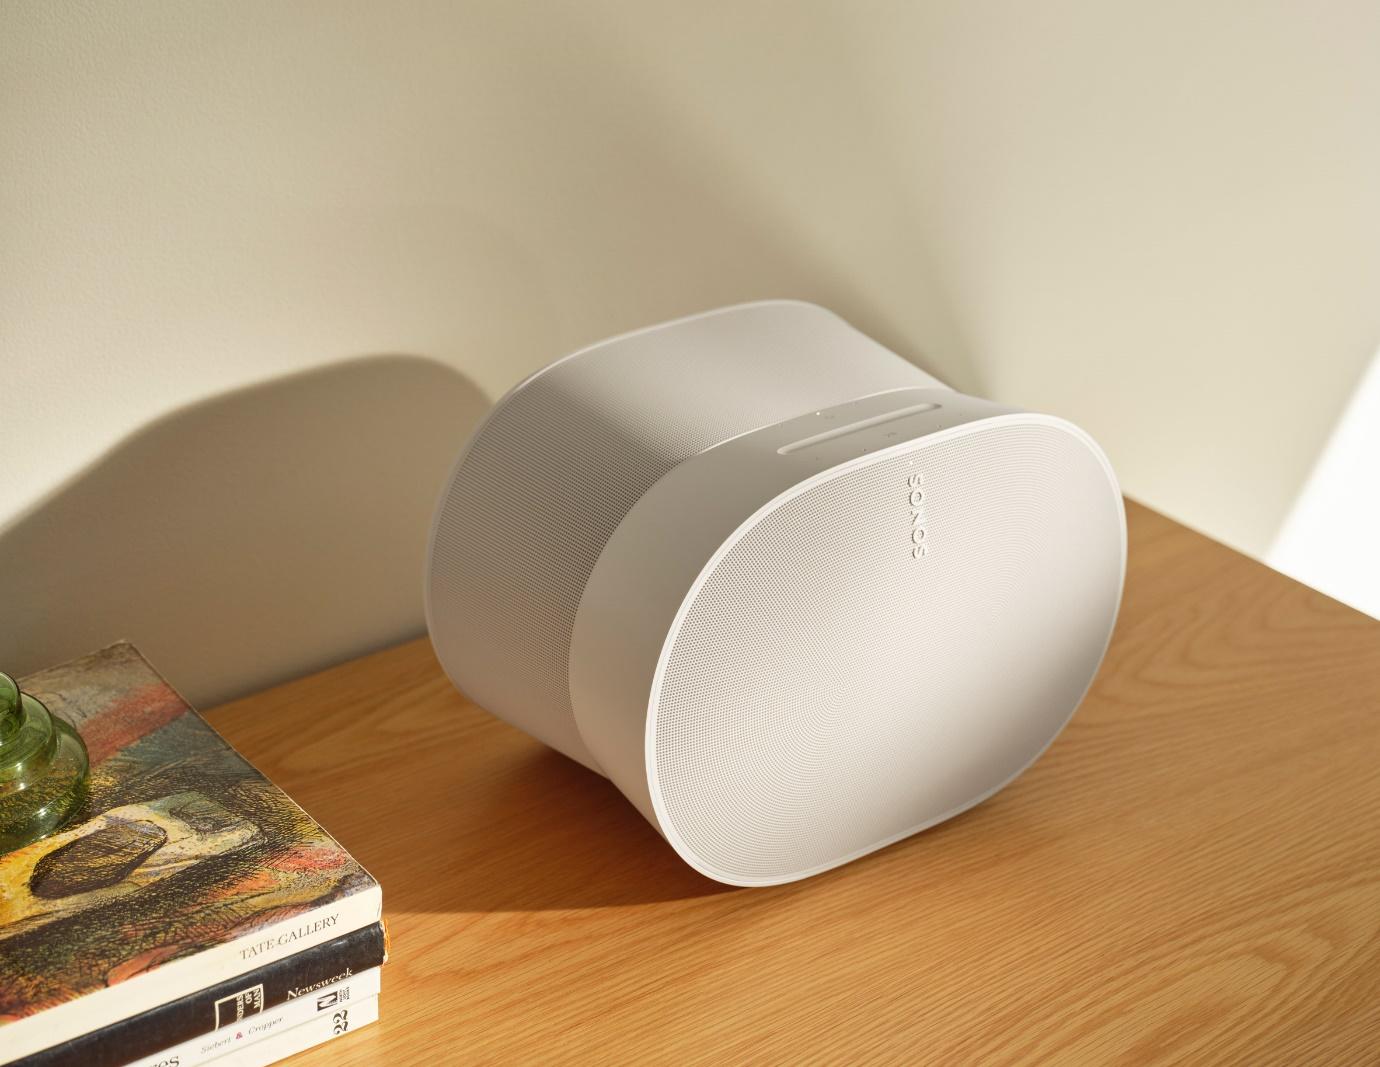 Era 300 smart speaker is "most sophisticated product Sonos has ever built"